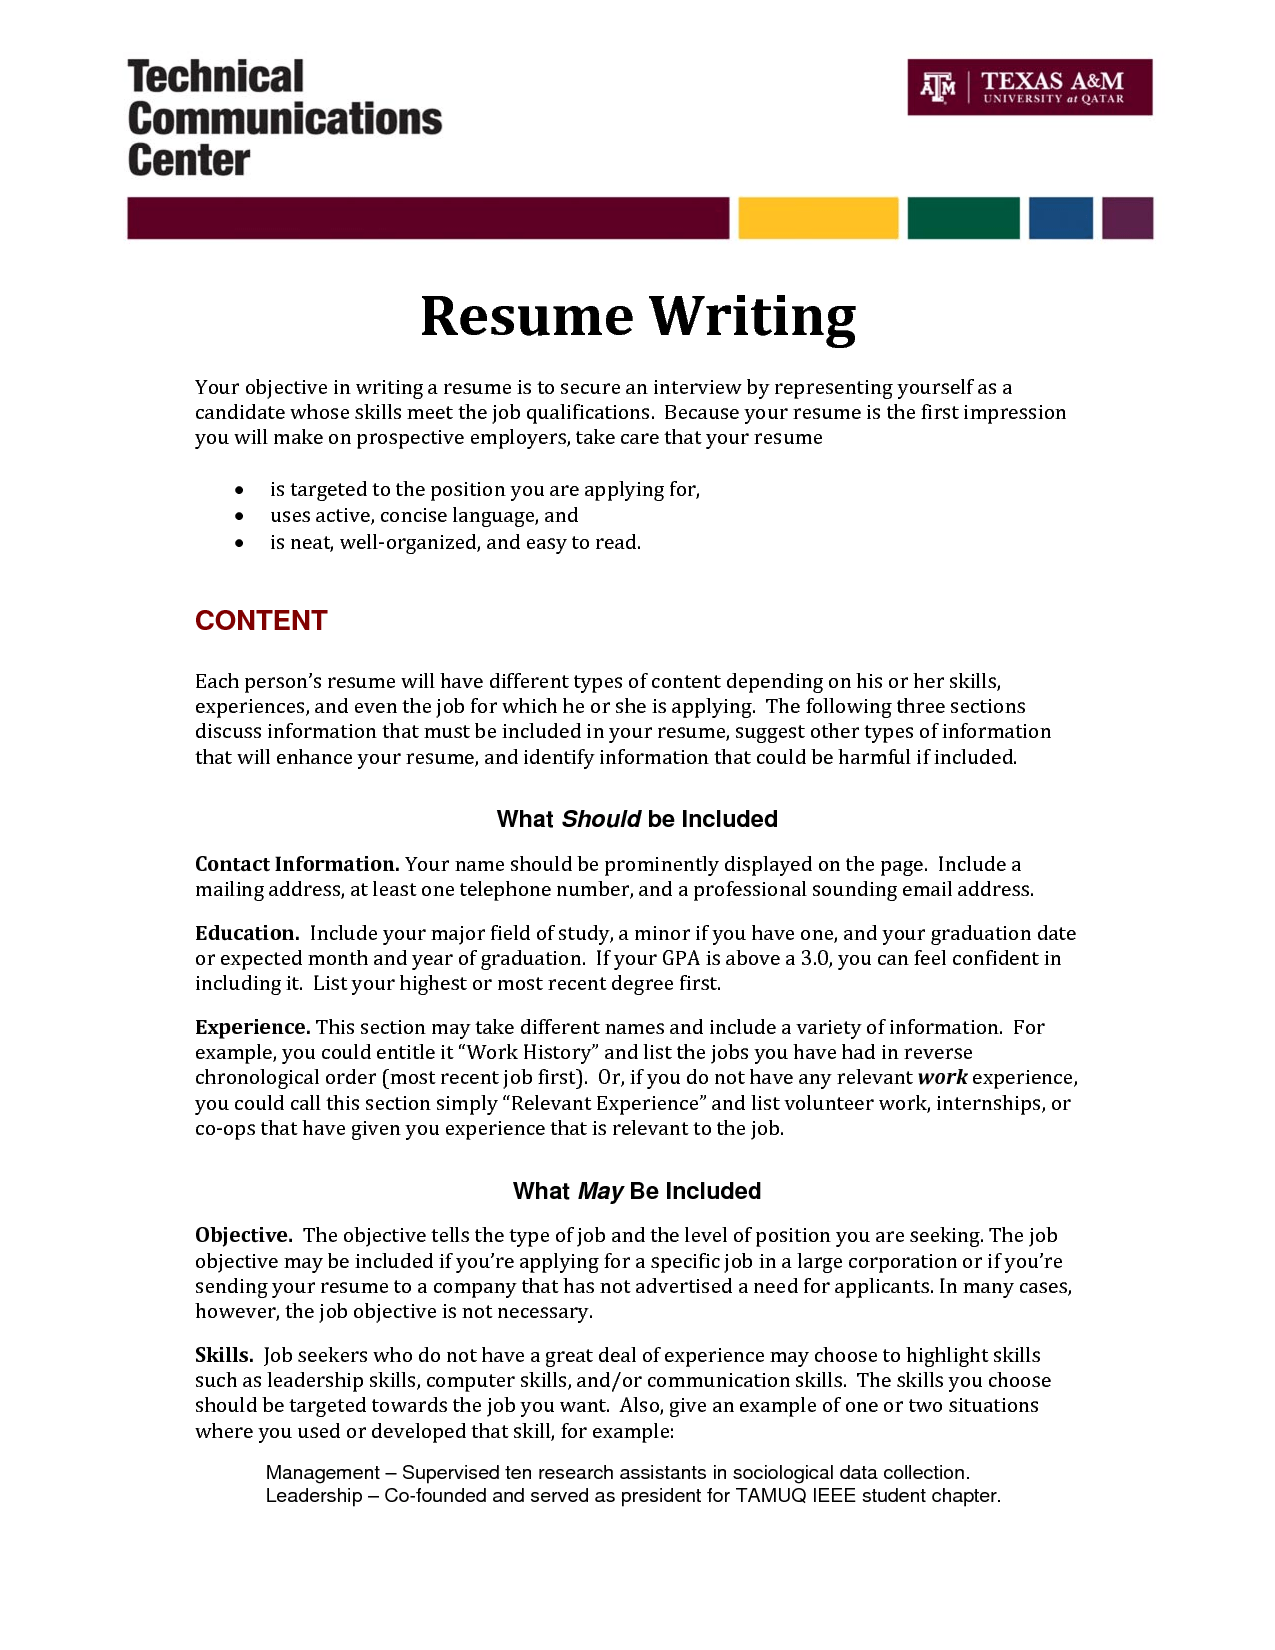 how to write blog on resume